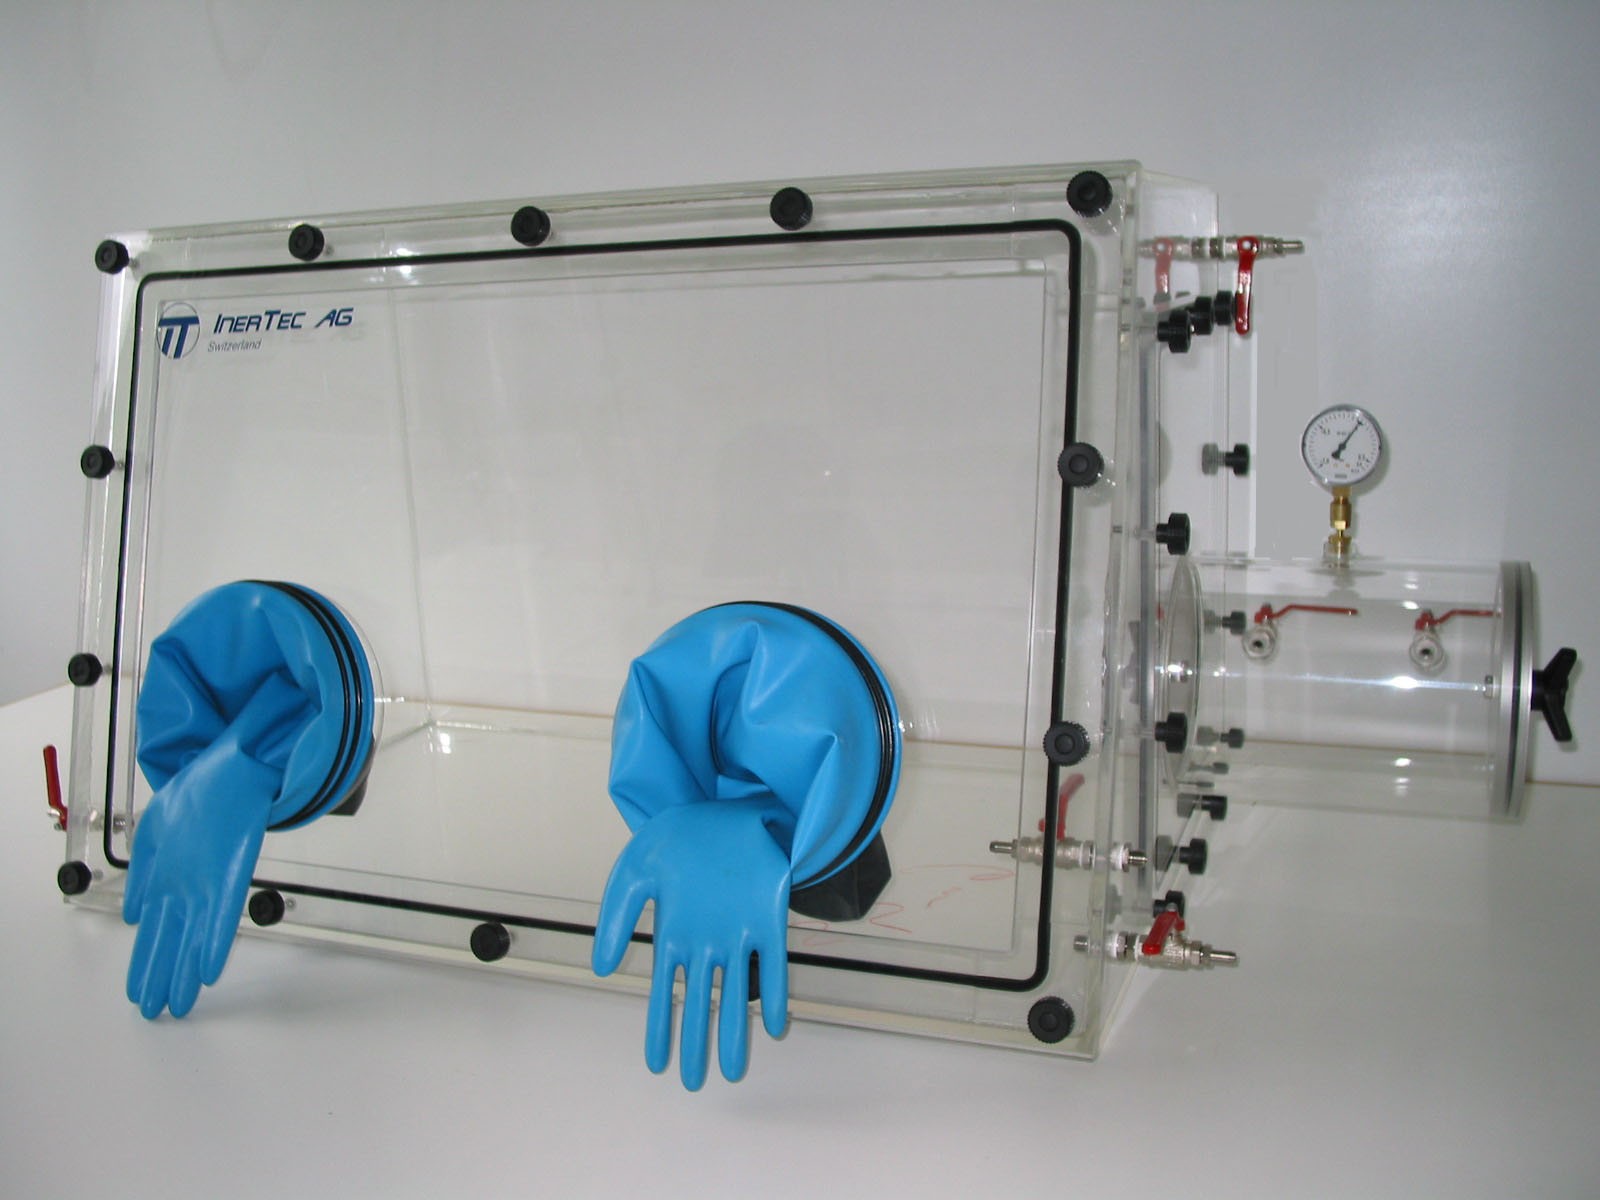 Glovebox made of acrylic&gt; Gas filling: automatic flushing with pressure control, front version: swivels upwards, side version: rectangular lock control: oxygen regulator with humidity display